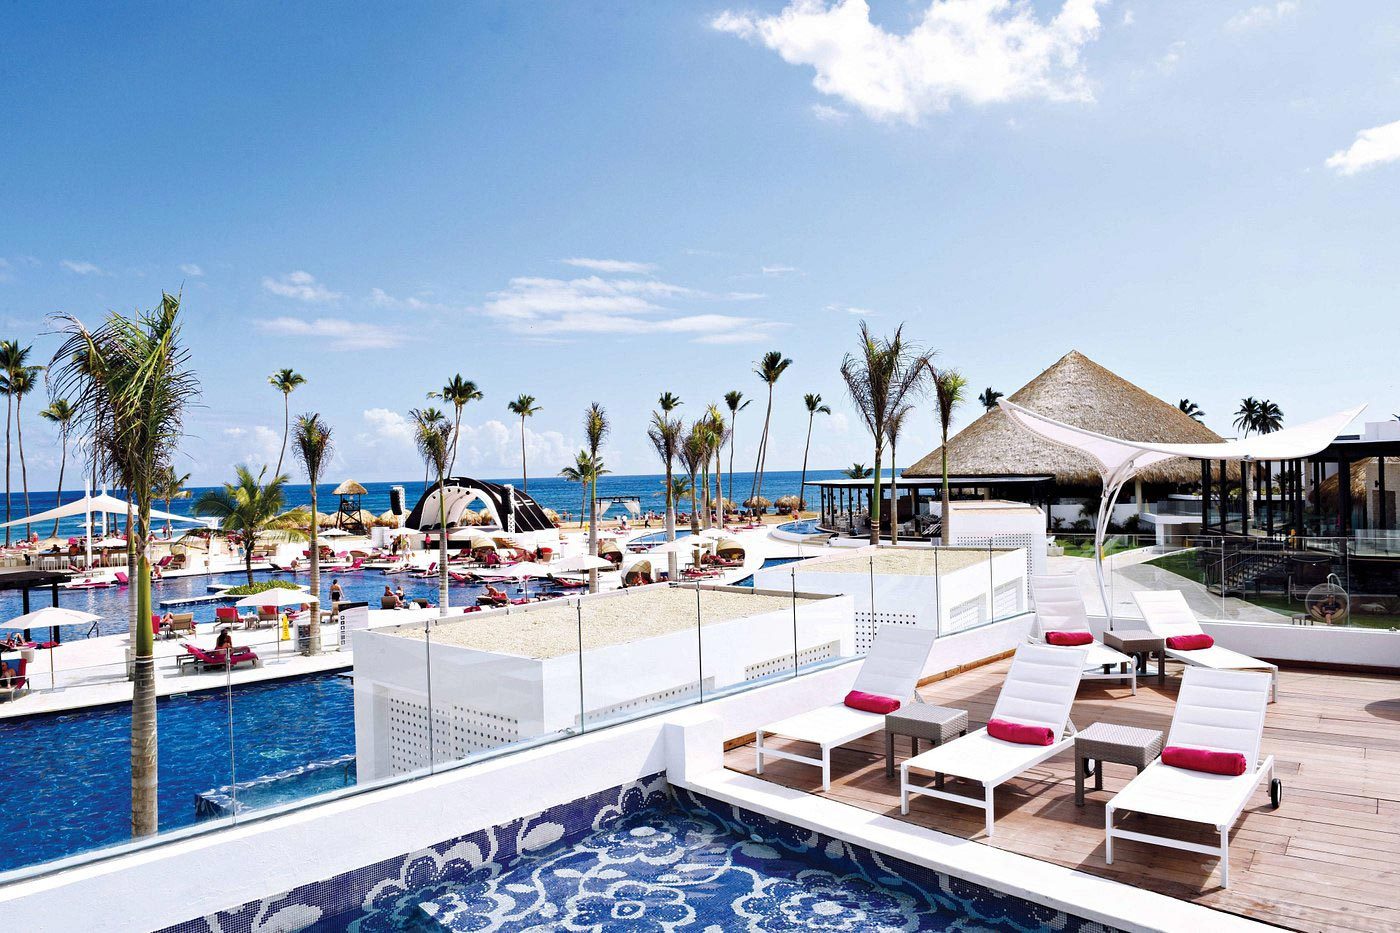 <h3>Royalton CHIC Punta Cana, Dominican Republic</h3> <p>Modern, swanky and sexy, this newer <a href="https://www.tripadvisor.com/Hotel_Review-g3200043-d6958549-Reviews-Royalton_CHIC_Punta_Cana_An_Autograph_Collection_Resort_Casino_Adults_Only-Uvero_Alto.html" rel="noreferrer noopener">adults-only offshoot</a> of the Royalton resort brand is designed to keep things spicy. Stylish, ultra-contemporary suites with underlit DreamBeds are another spot to rest your eyes … or not. Included 24-hour room service lets you stay in bed or on your private balcony or terrace, but reservation-free dining at seven restaurants means date night during your <a href="https://www.rd.com/list/romantic-getaways/" rel="noopener noreferrer">romantic getaway</a> is only steps away.</p> <p>For the different love languages couples may share, fitness facilities, a spa and a casino let guests choose the way they want to make memories. But novelty acts like CHIC Angels—who appear without fail at the weekly foam party at the oversized pool—and a mermaid pool give couples something new to talk about at every turn. Any lulls in conversation and connection should be reserved for dozing off on the goldenrod sands of Uvero Alto.</p> <p><strong>Pros:</strong></p> <ul> <li>Adults-only resort</li> <li>Stylish, trendy and luxurious—great for reigniting a spark</li> <li>Magnificent pool with ample seating in and around it</li> <li>24-hour room service included</li> </ul> <p><strong>Cons:</strong></p> <ul> <li>Can be loud by the pool</li> <li>Limited ocean views</li> </ul> <p class="listicle-page__cta-button-shop"><a class="shop-btn" href="https://www.tripadvisor.com/Hotel_Review-g3200043-d6958549-Reviews-Royalton_CHIC_Punta_Cana_An_Autograph_Collection_Resort_Casino_Adults_Only-Uvero_Alto.html">Book Now</a></p>